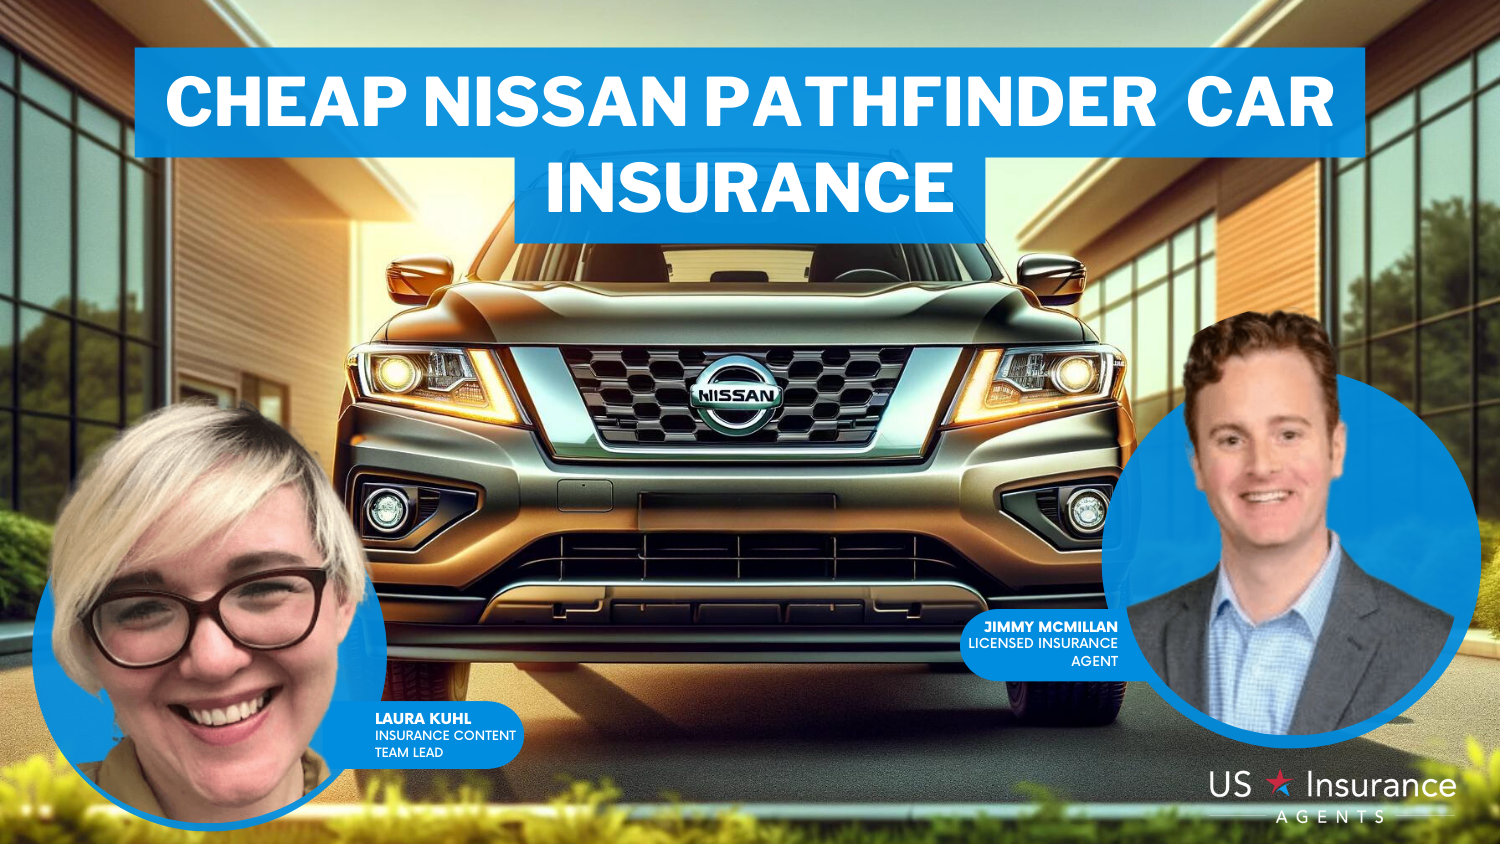 Cheap Nissan Pathfinder Car Insurance: American Family, State Farm, and Progressive